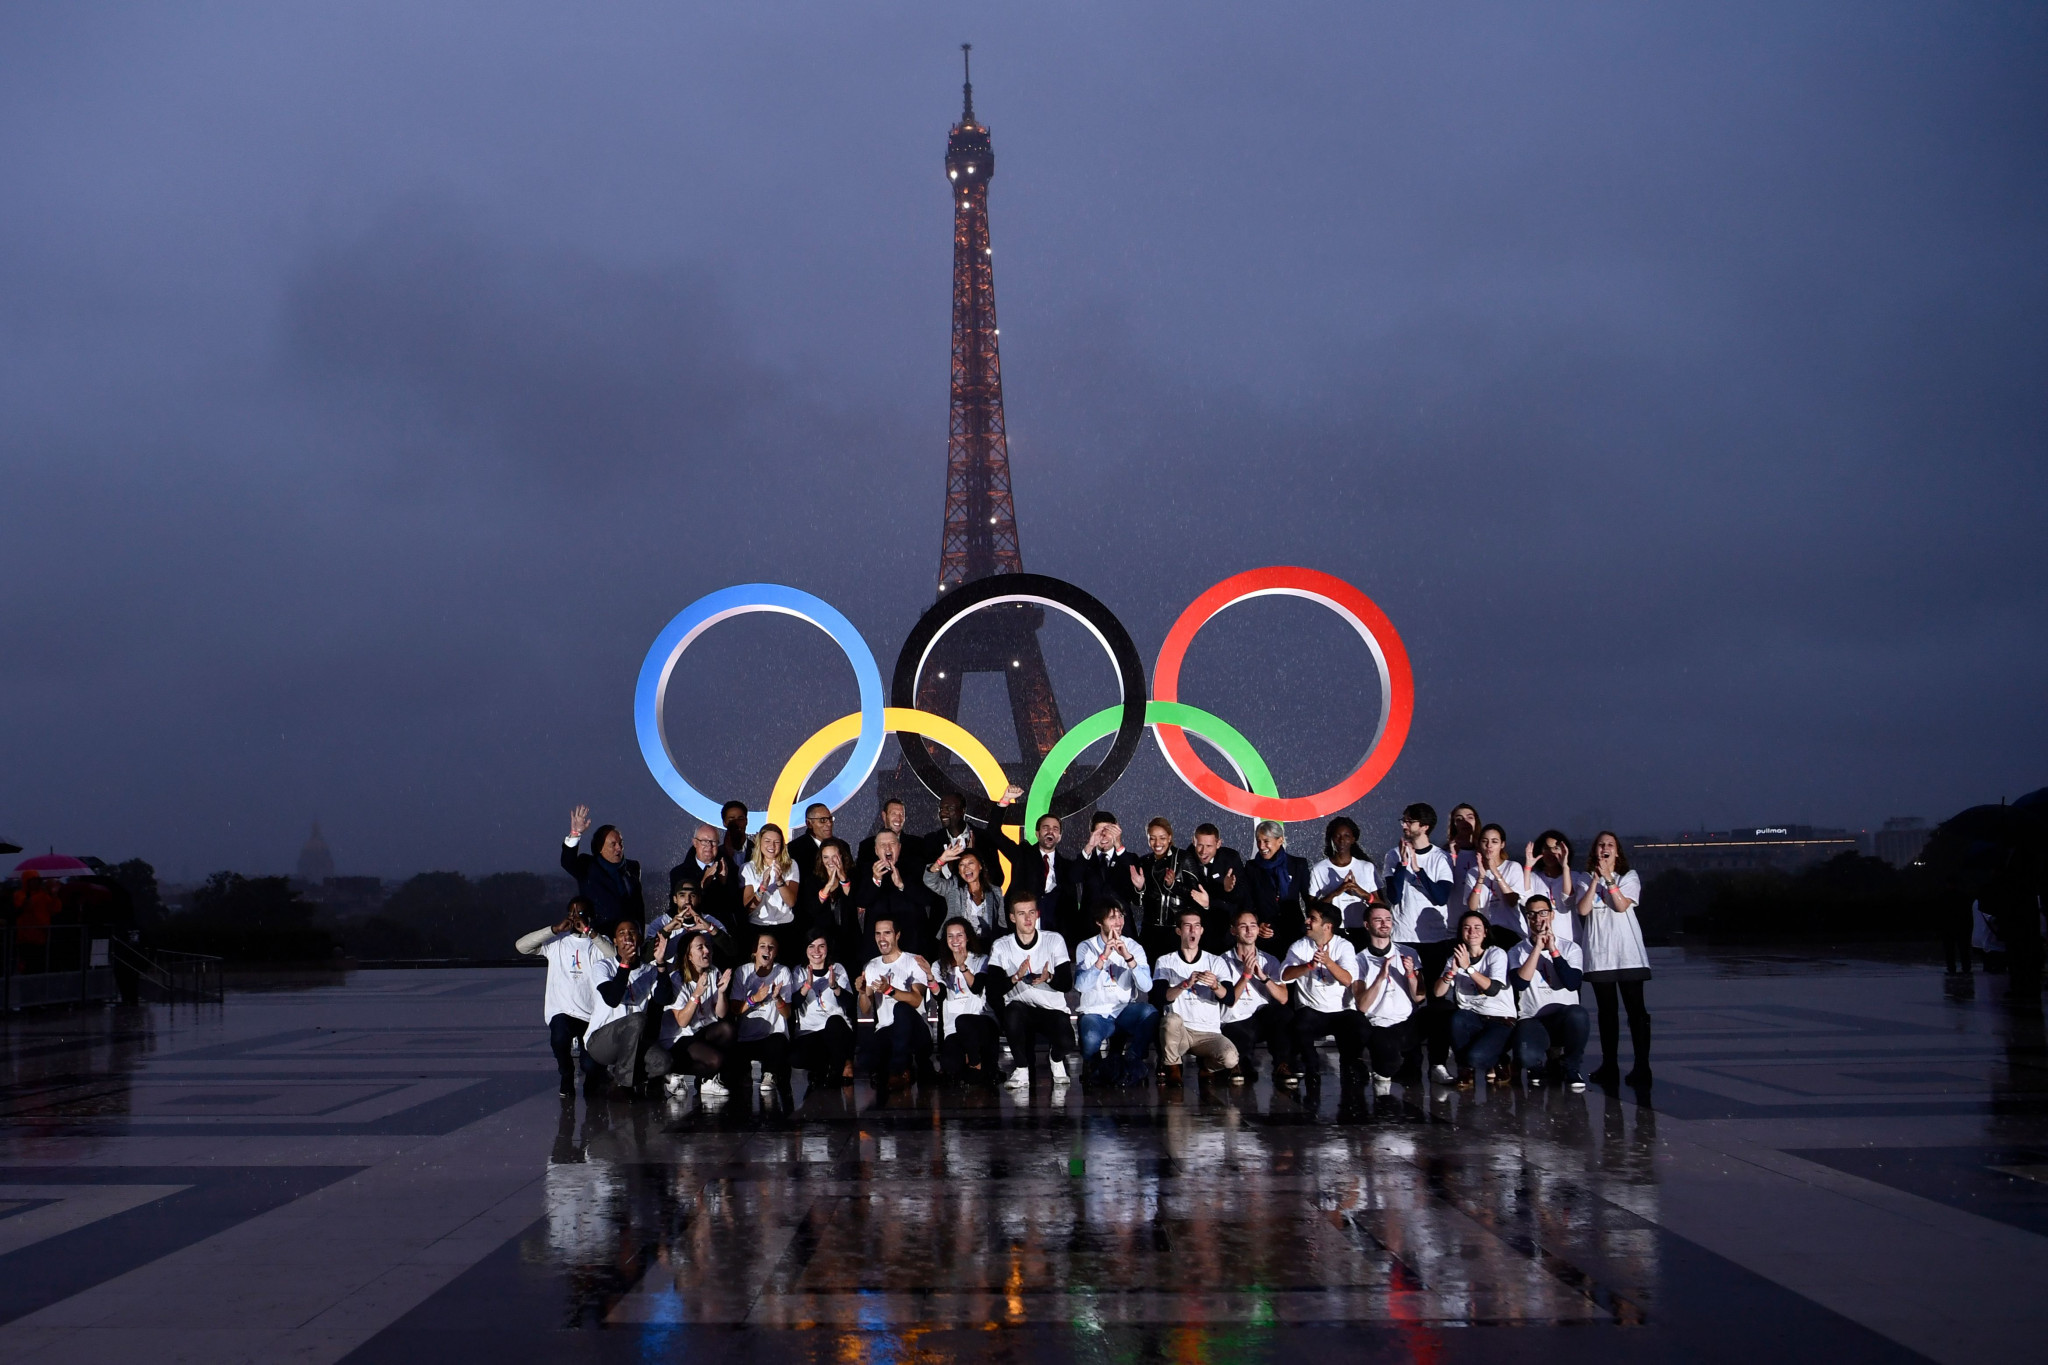 Atos has announced the successful management of the Paris 2024 volunteer portal ©Getty Images